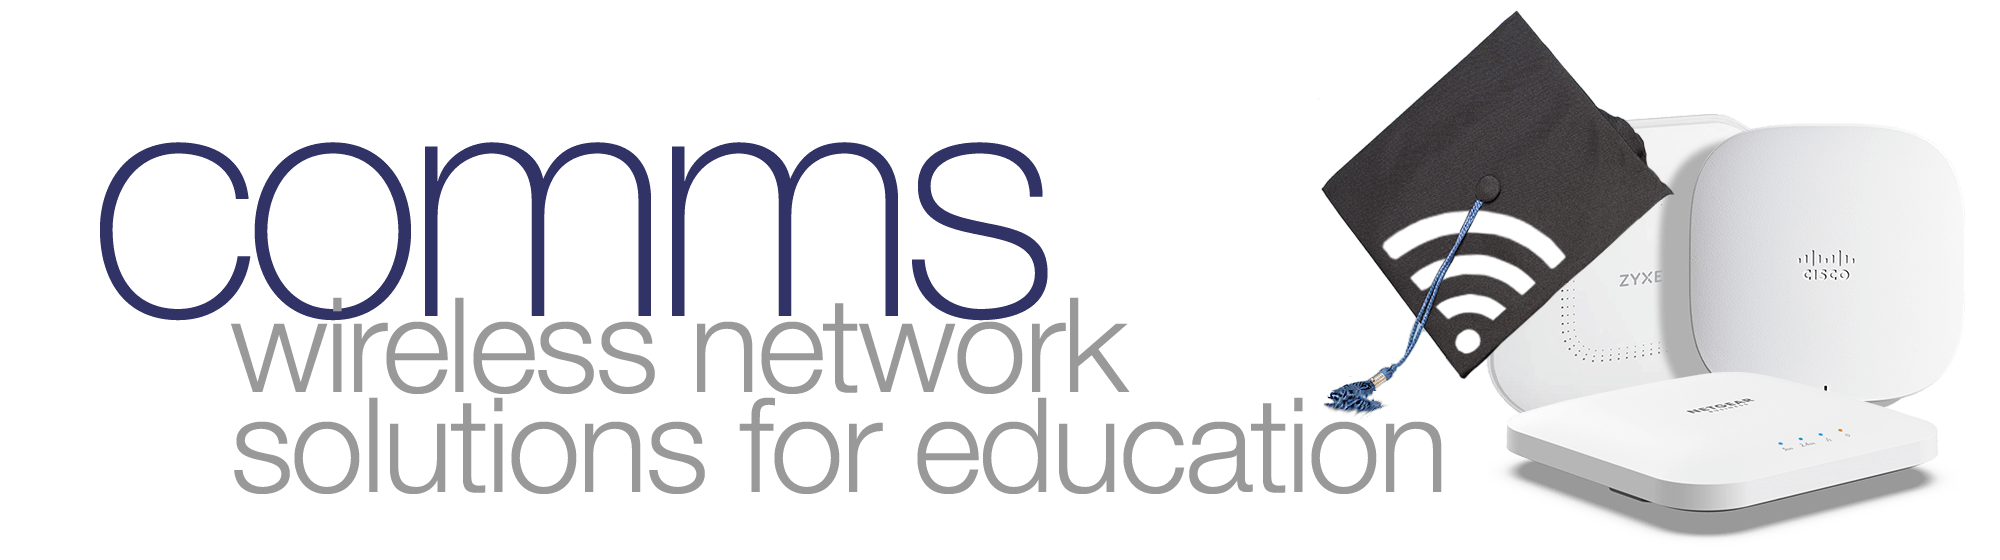 Comms wireless solutions for education logo